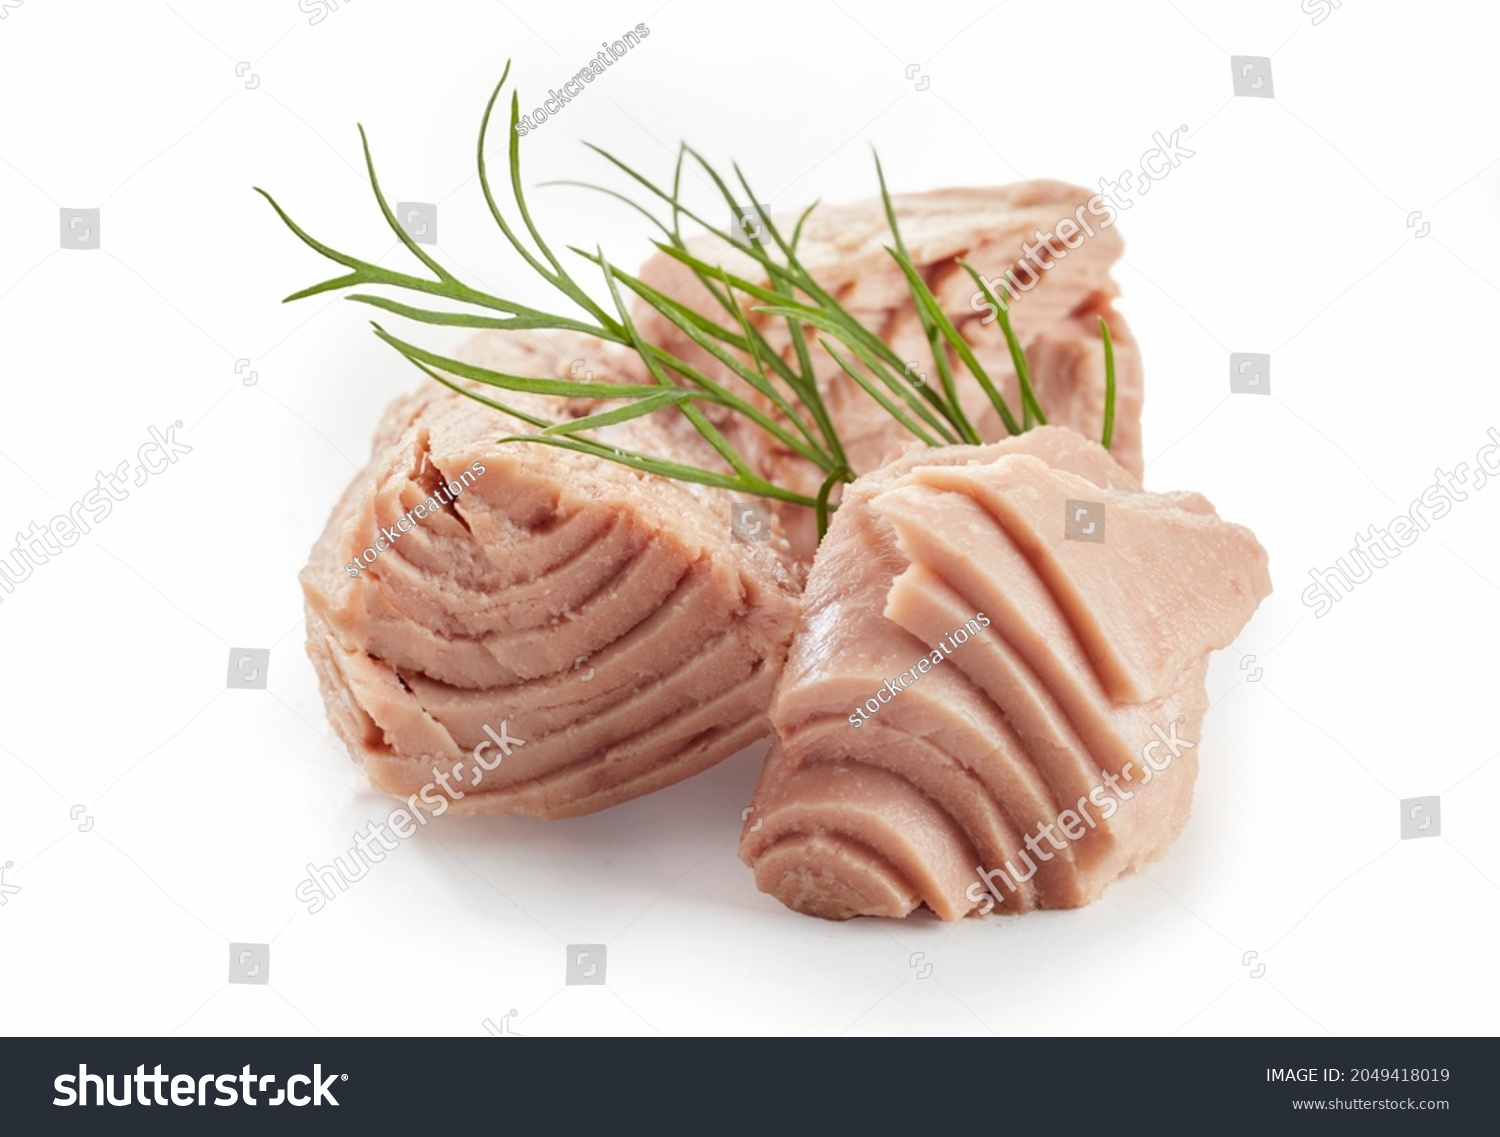 Closeup of sliced canned tuna fish fillet with sprig of fresh green dill on white background #2049418019